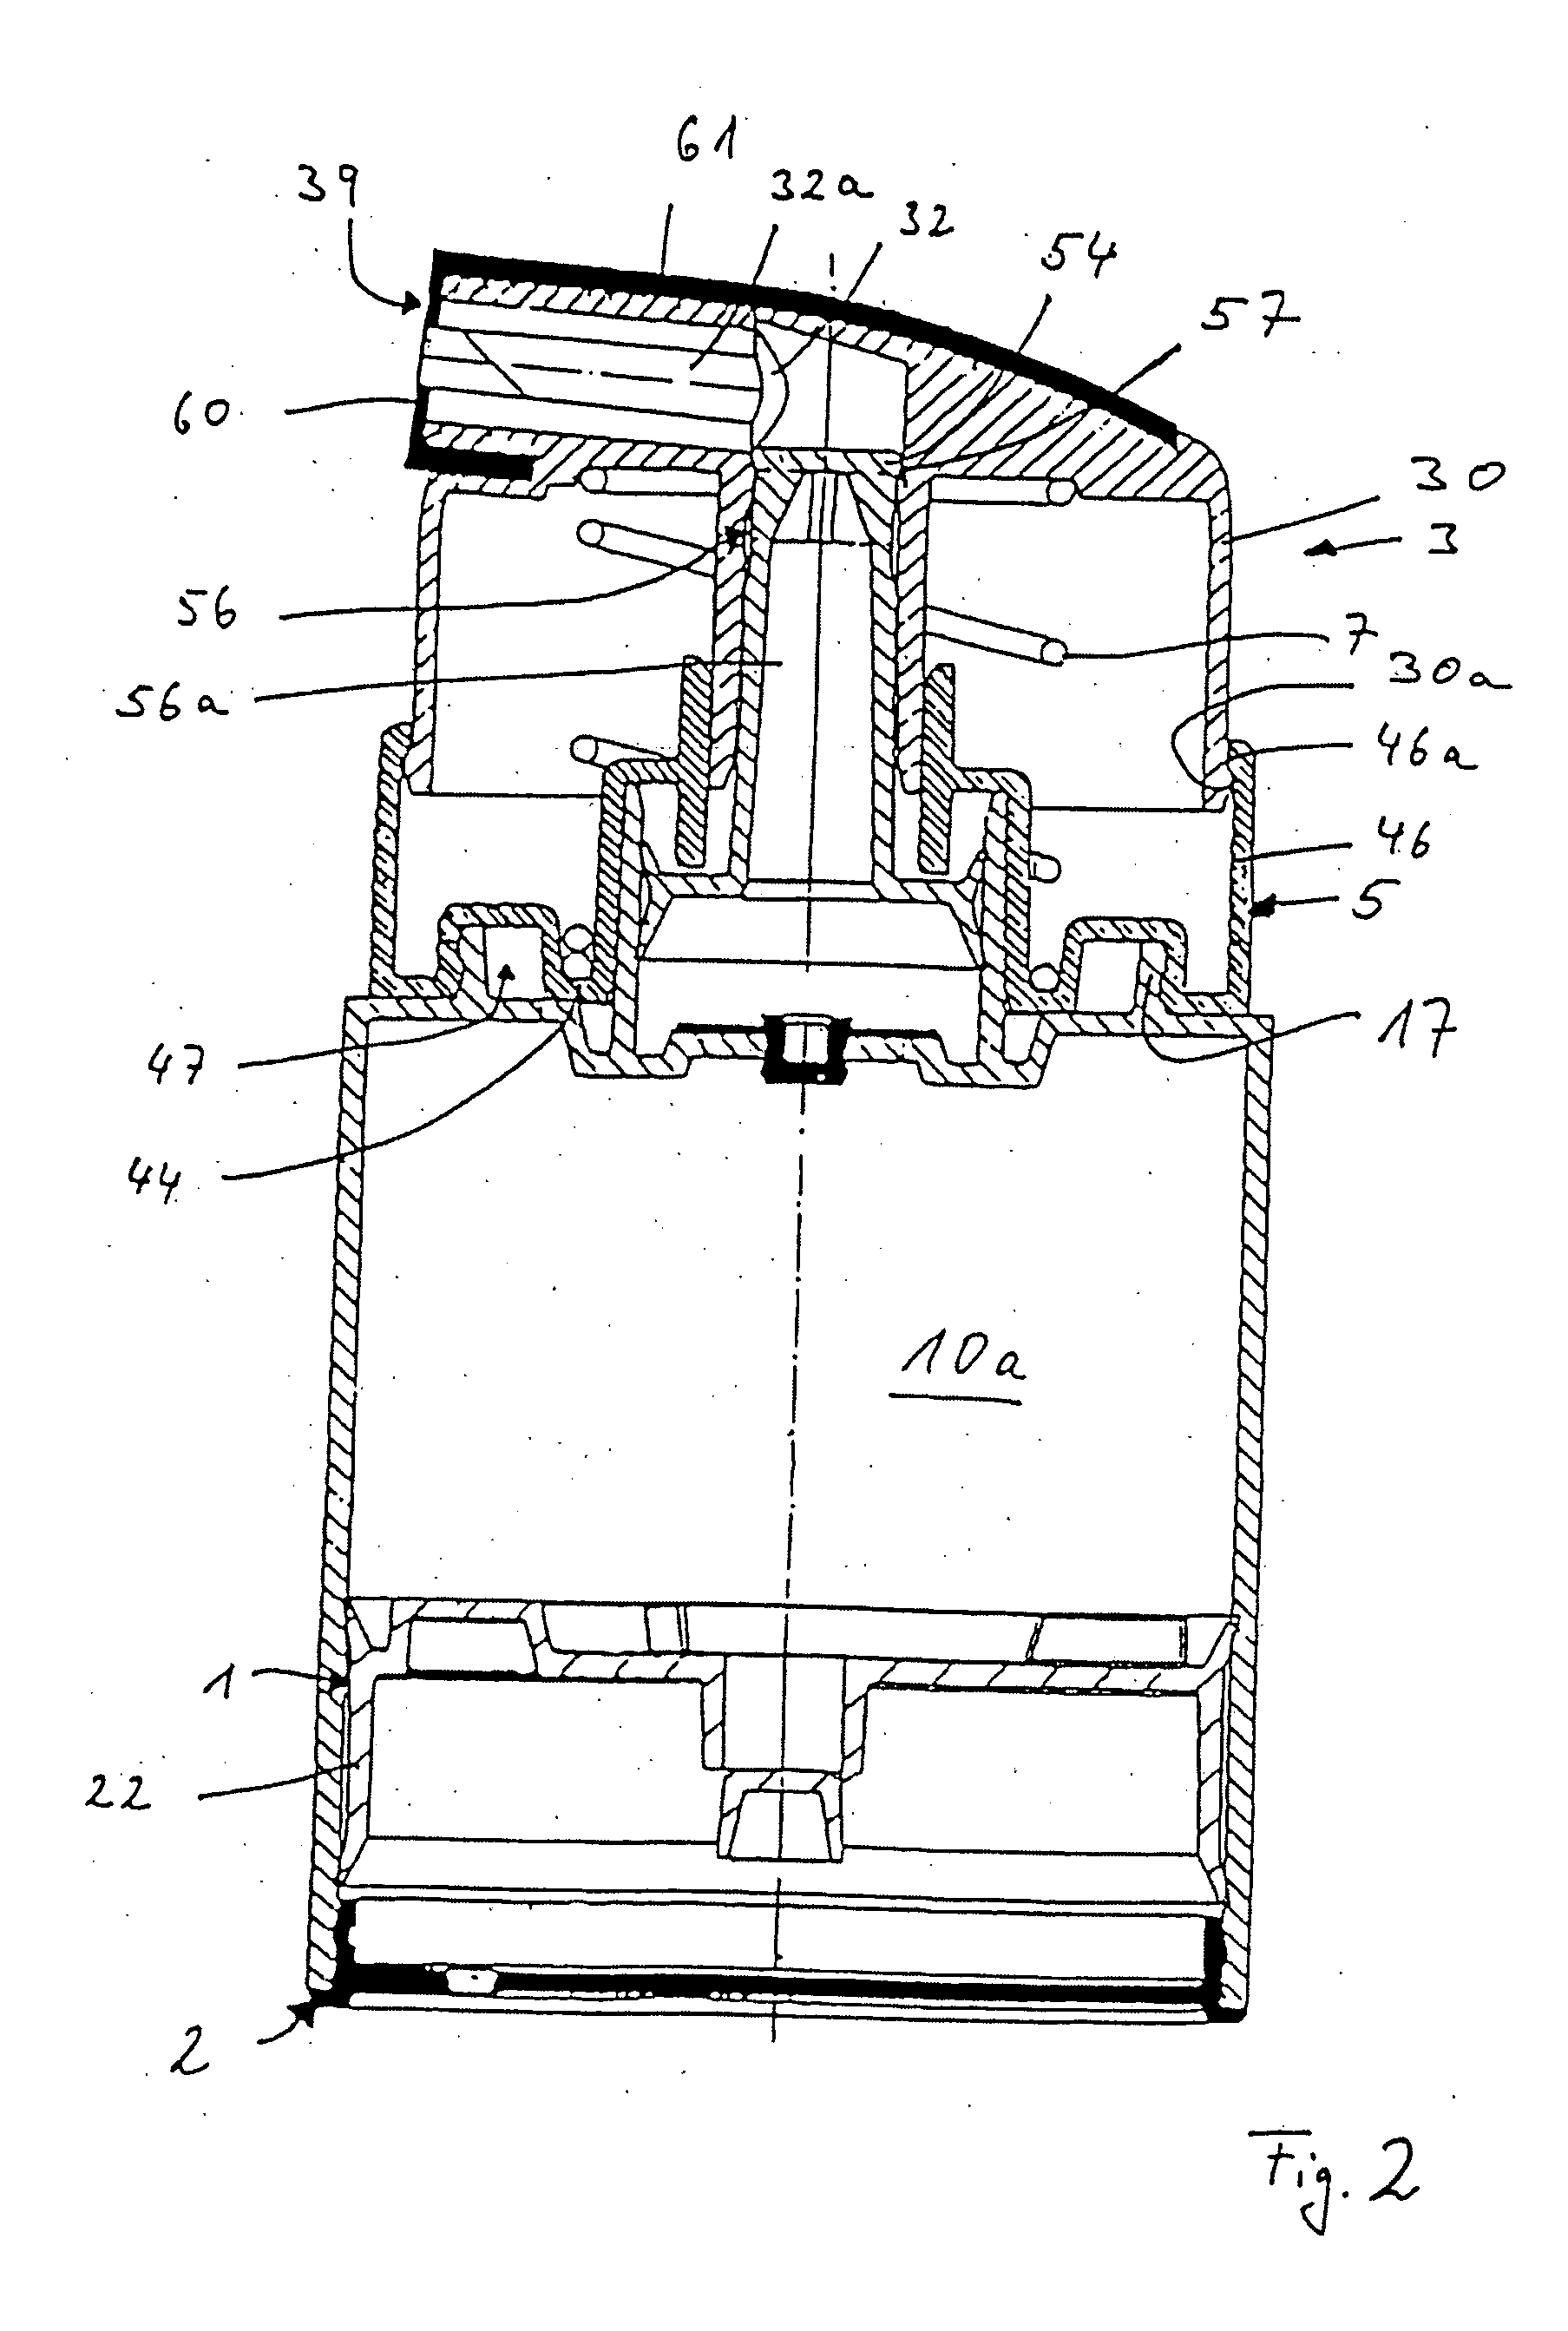 Cosmetic or dermatological preparation for use with dispenser system